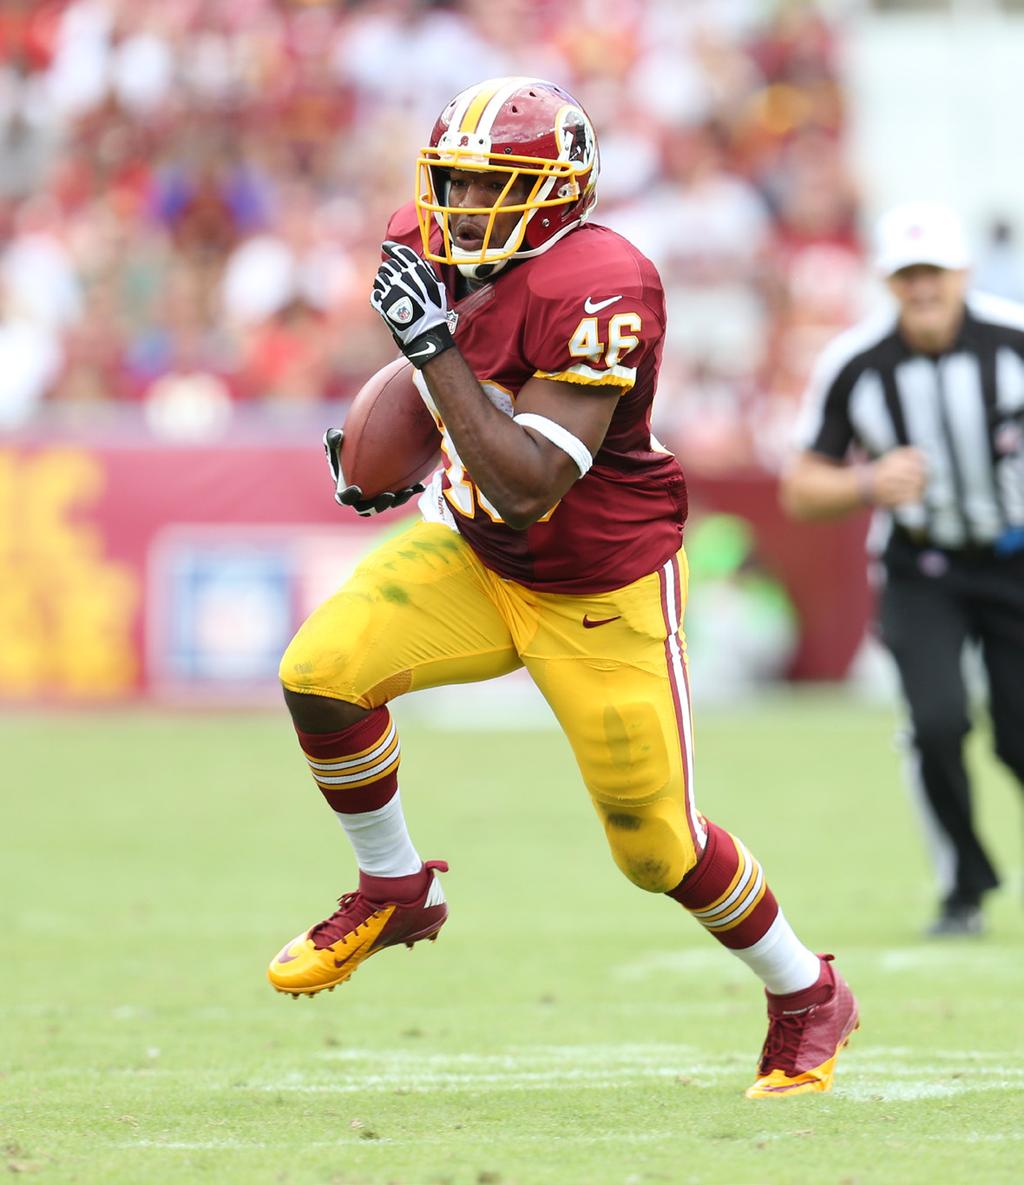 Game Release A.M.-Trak Away from football, running back Alfred Morris might be best known for his beloved car a 1991 Mazda 626 he affectionately names Bentley.